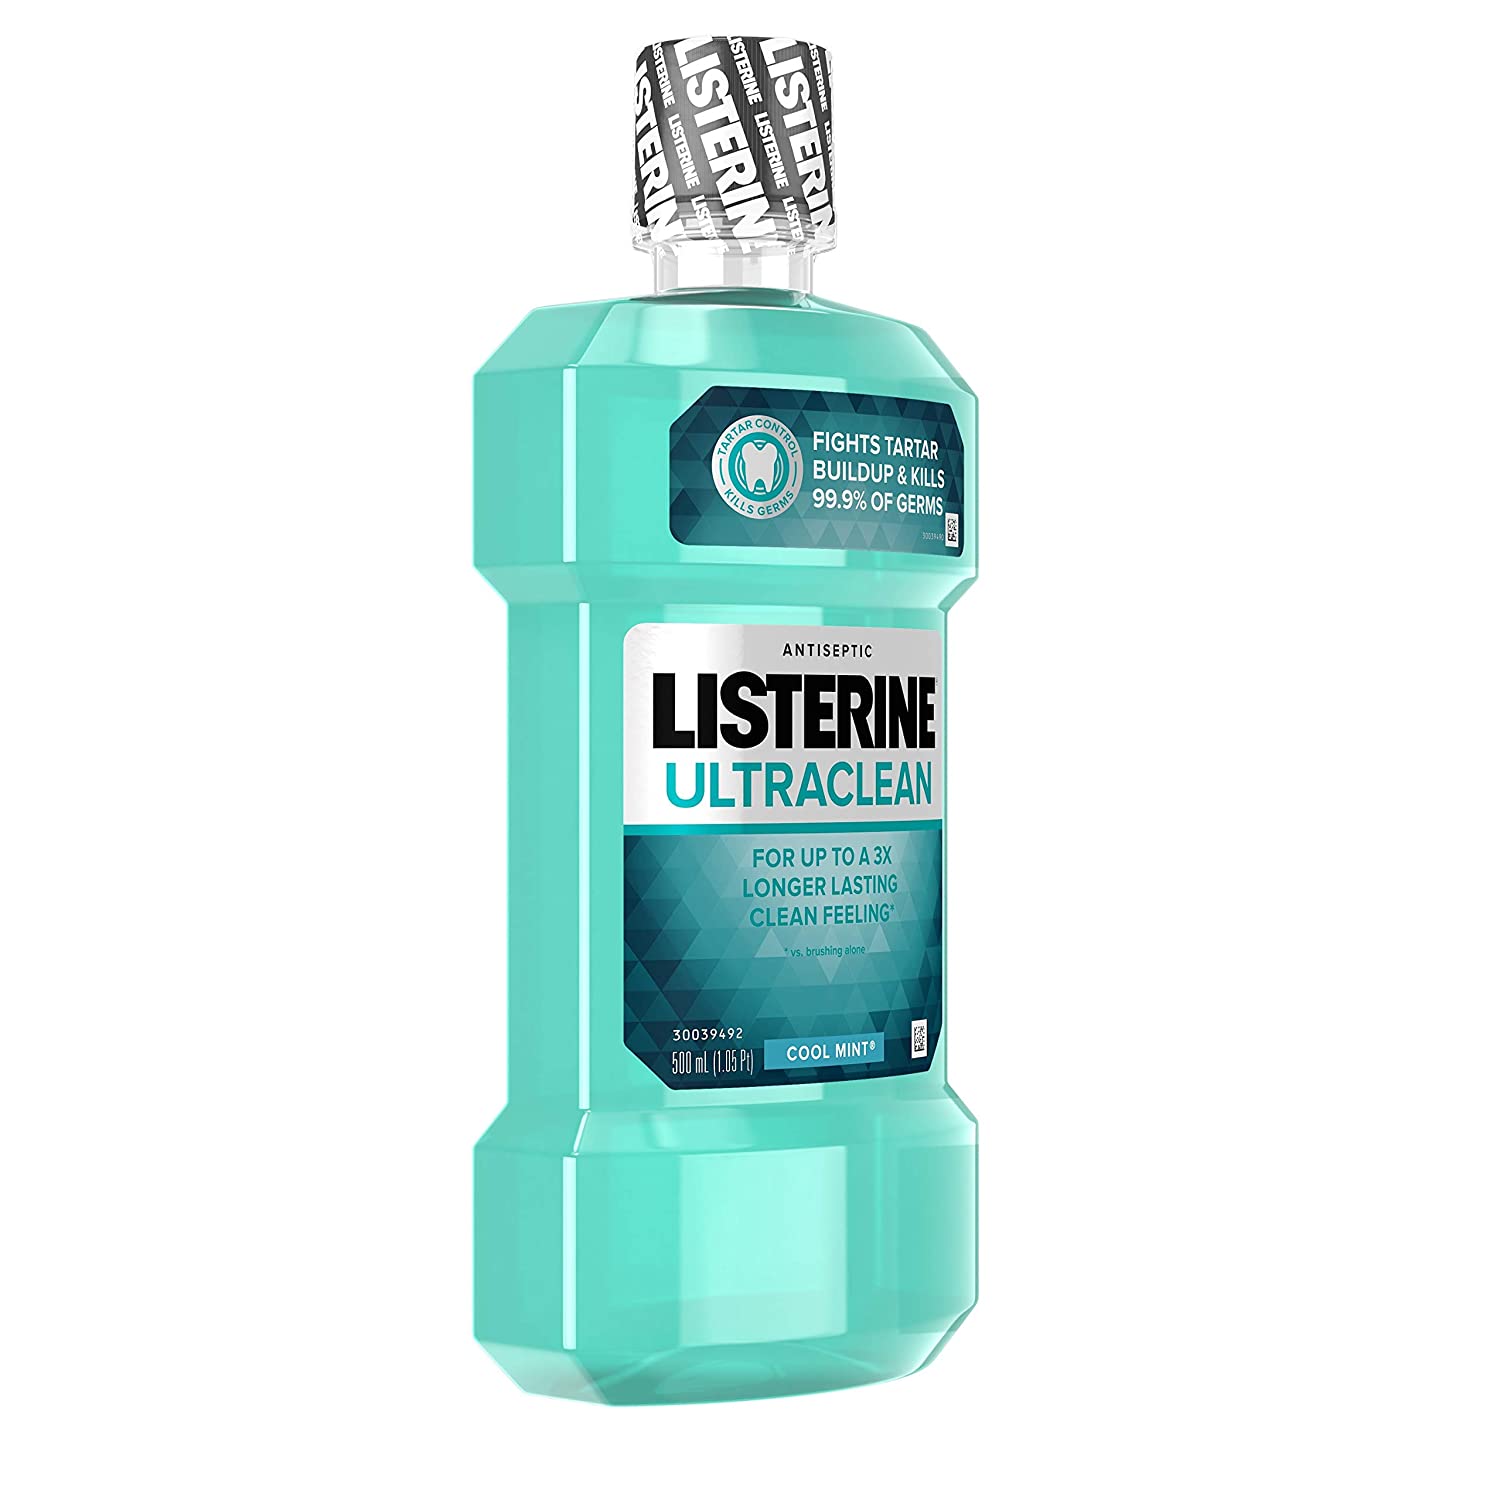  Listerine Ultraclean Oral Care Antiseptic Mouthwash with Everfresh Technology to Help Fight Bad Breath, Gingivitis, Plaque and Tartar, Cool Mint, 500 ml